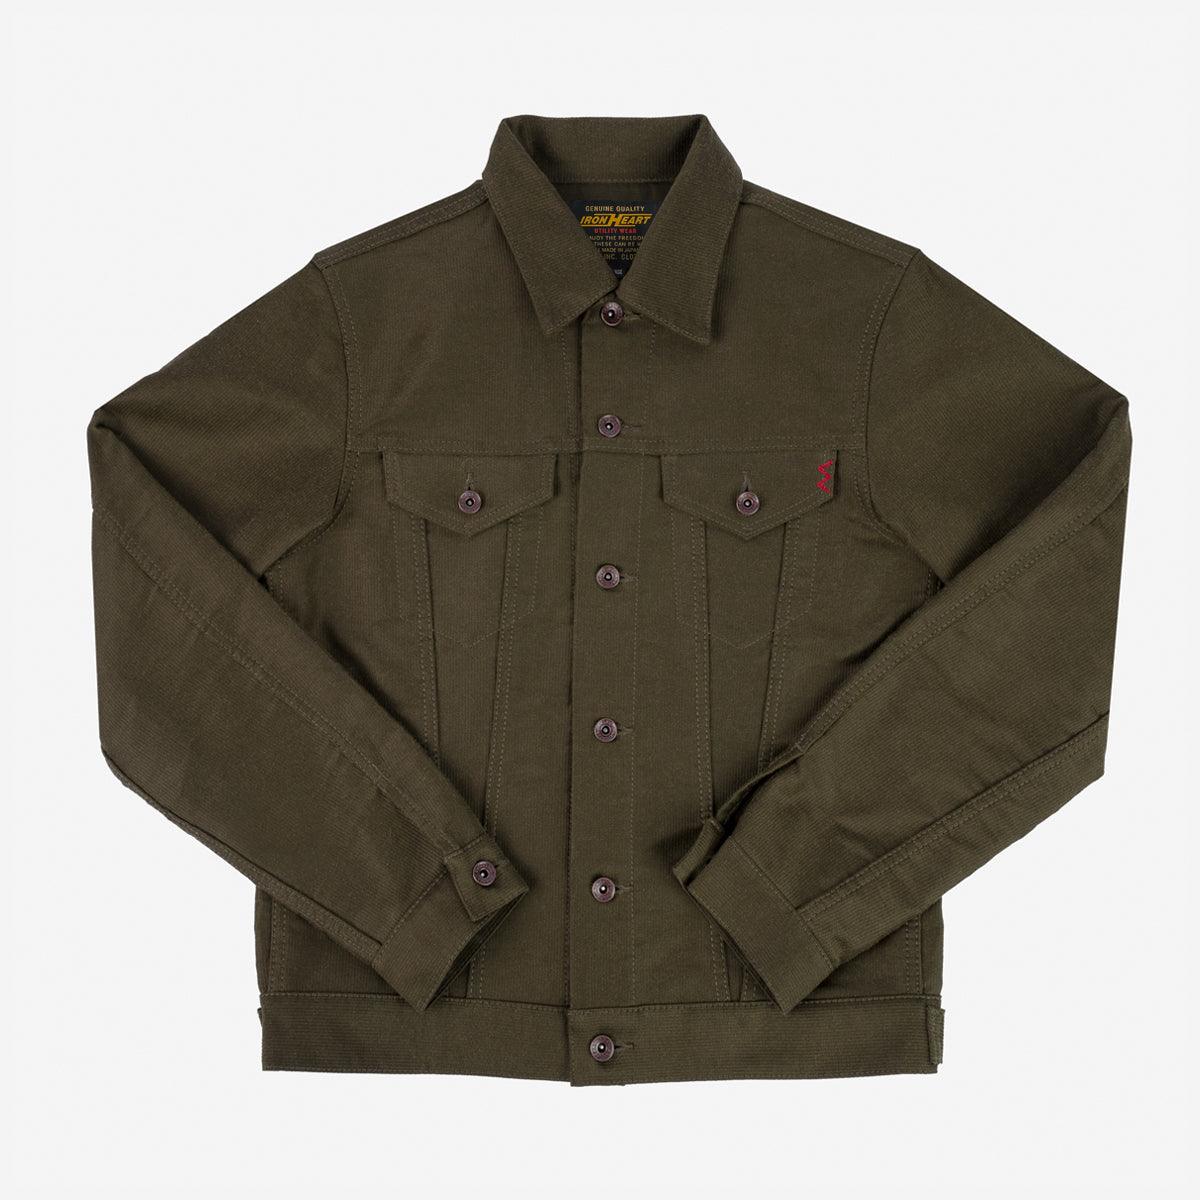 Iron Heart IHJ-126-ODG 12oz Whipcord Type III Jacket - Olive Drab Green - Guilty Party